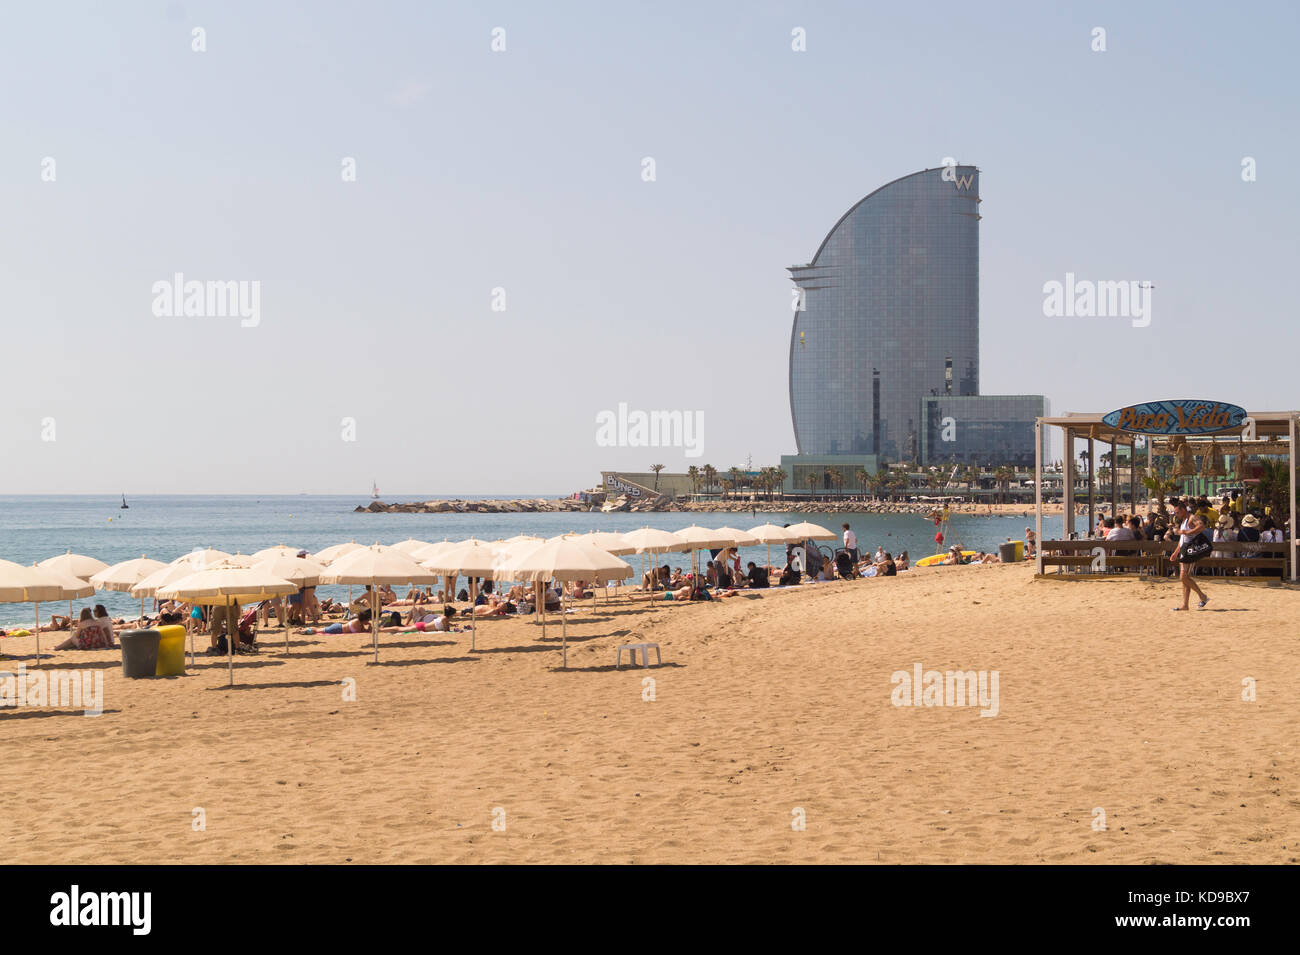 The beach at Barceloneta showing Hotel Vela in the distance.; Stock Photo